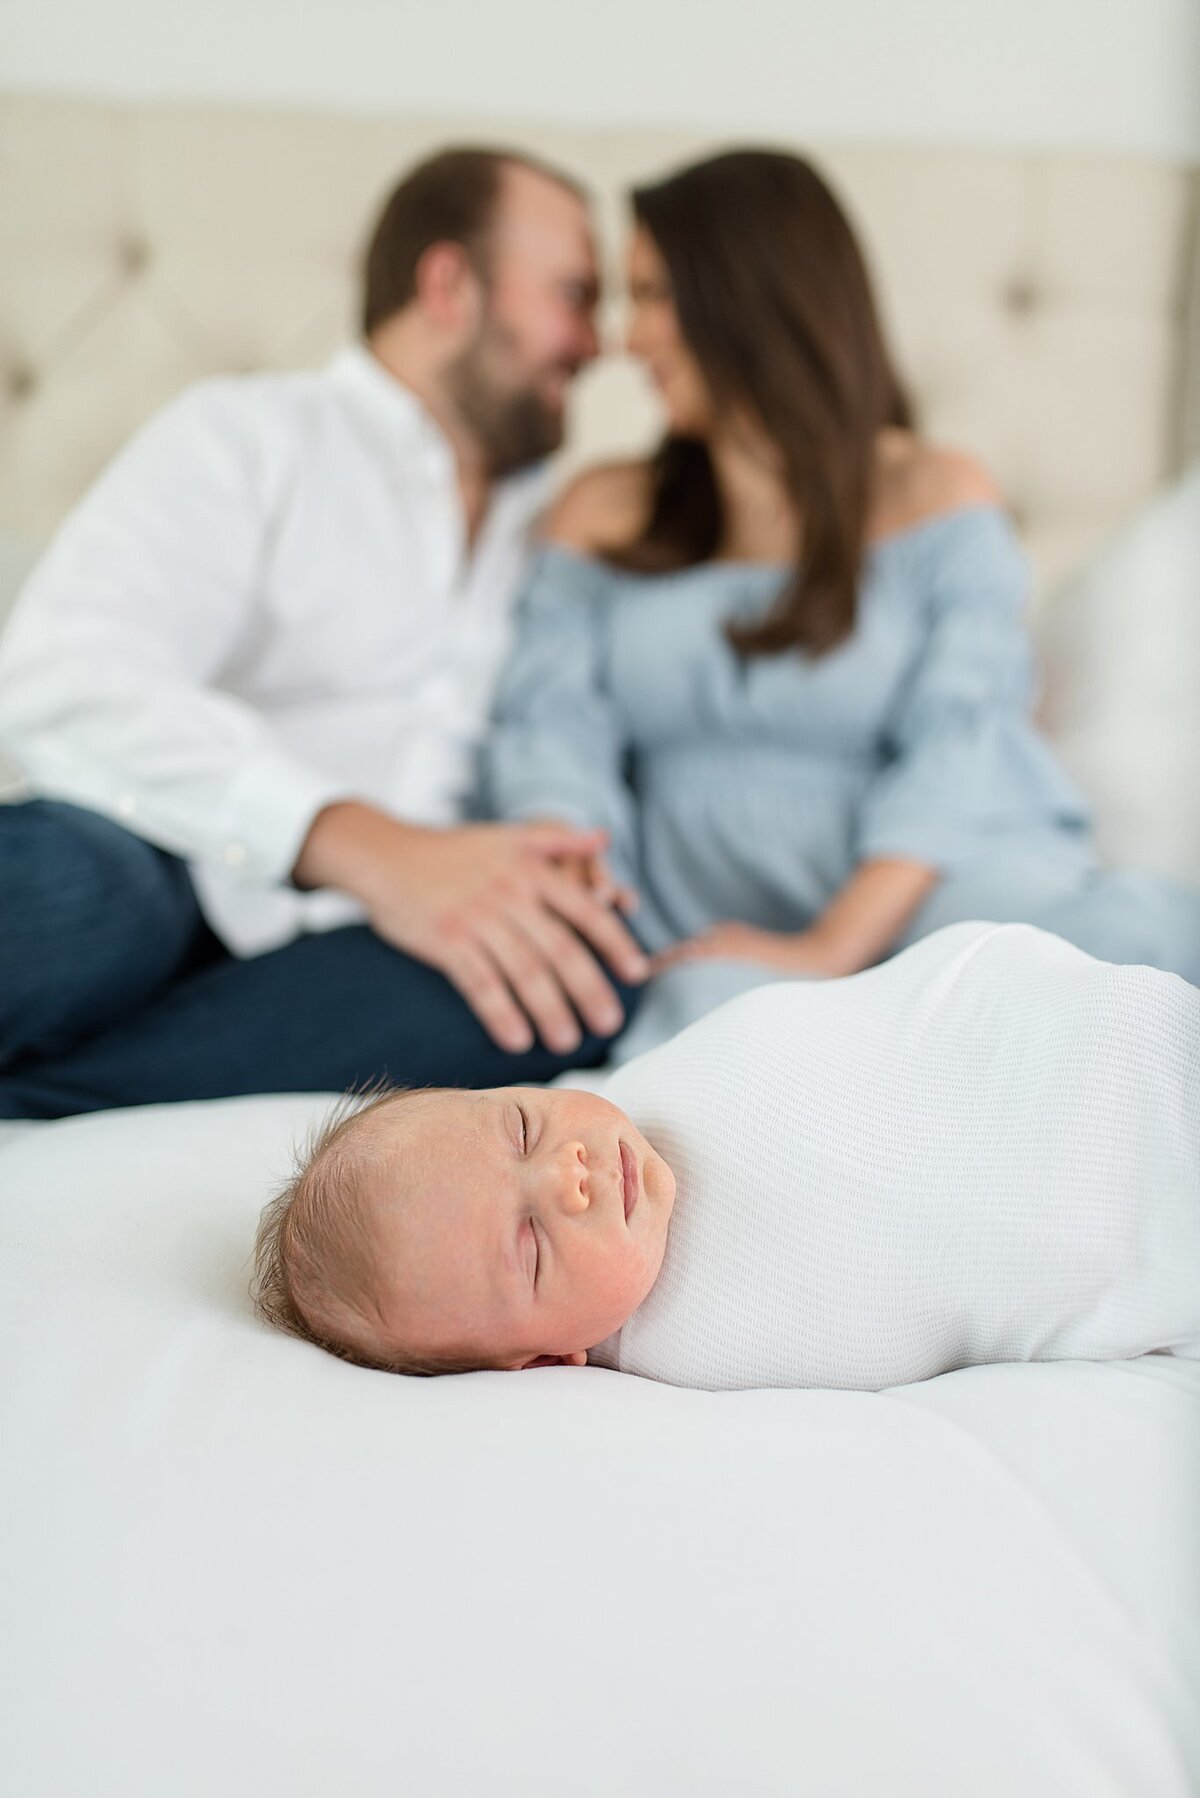 Baby boy on bed with parents kissing behind him